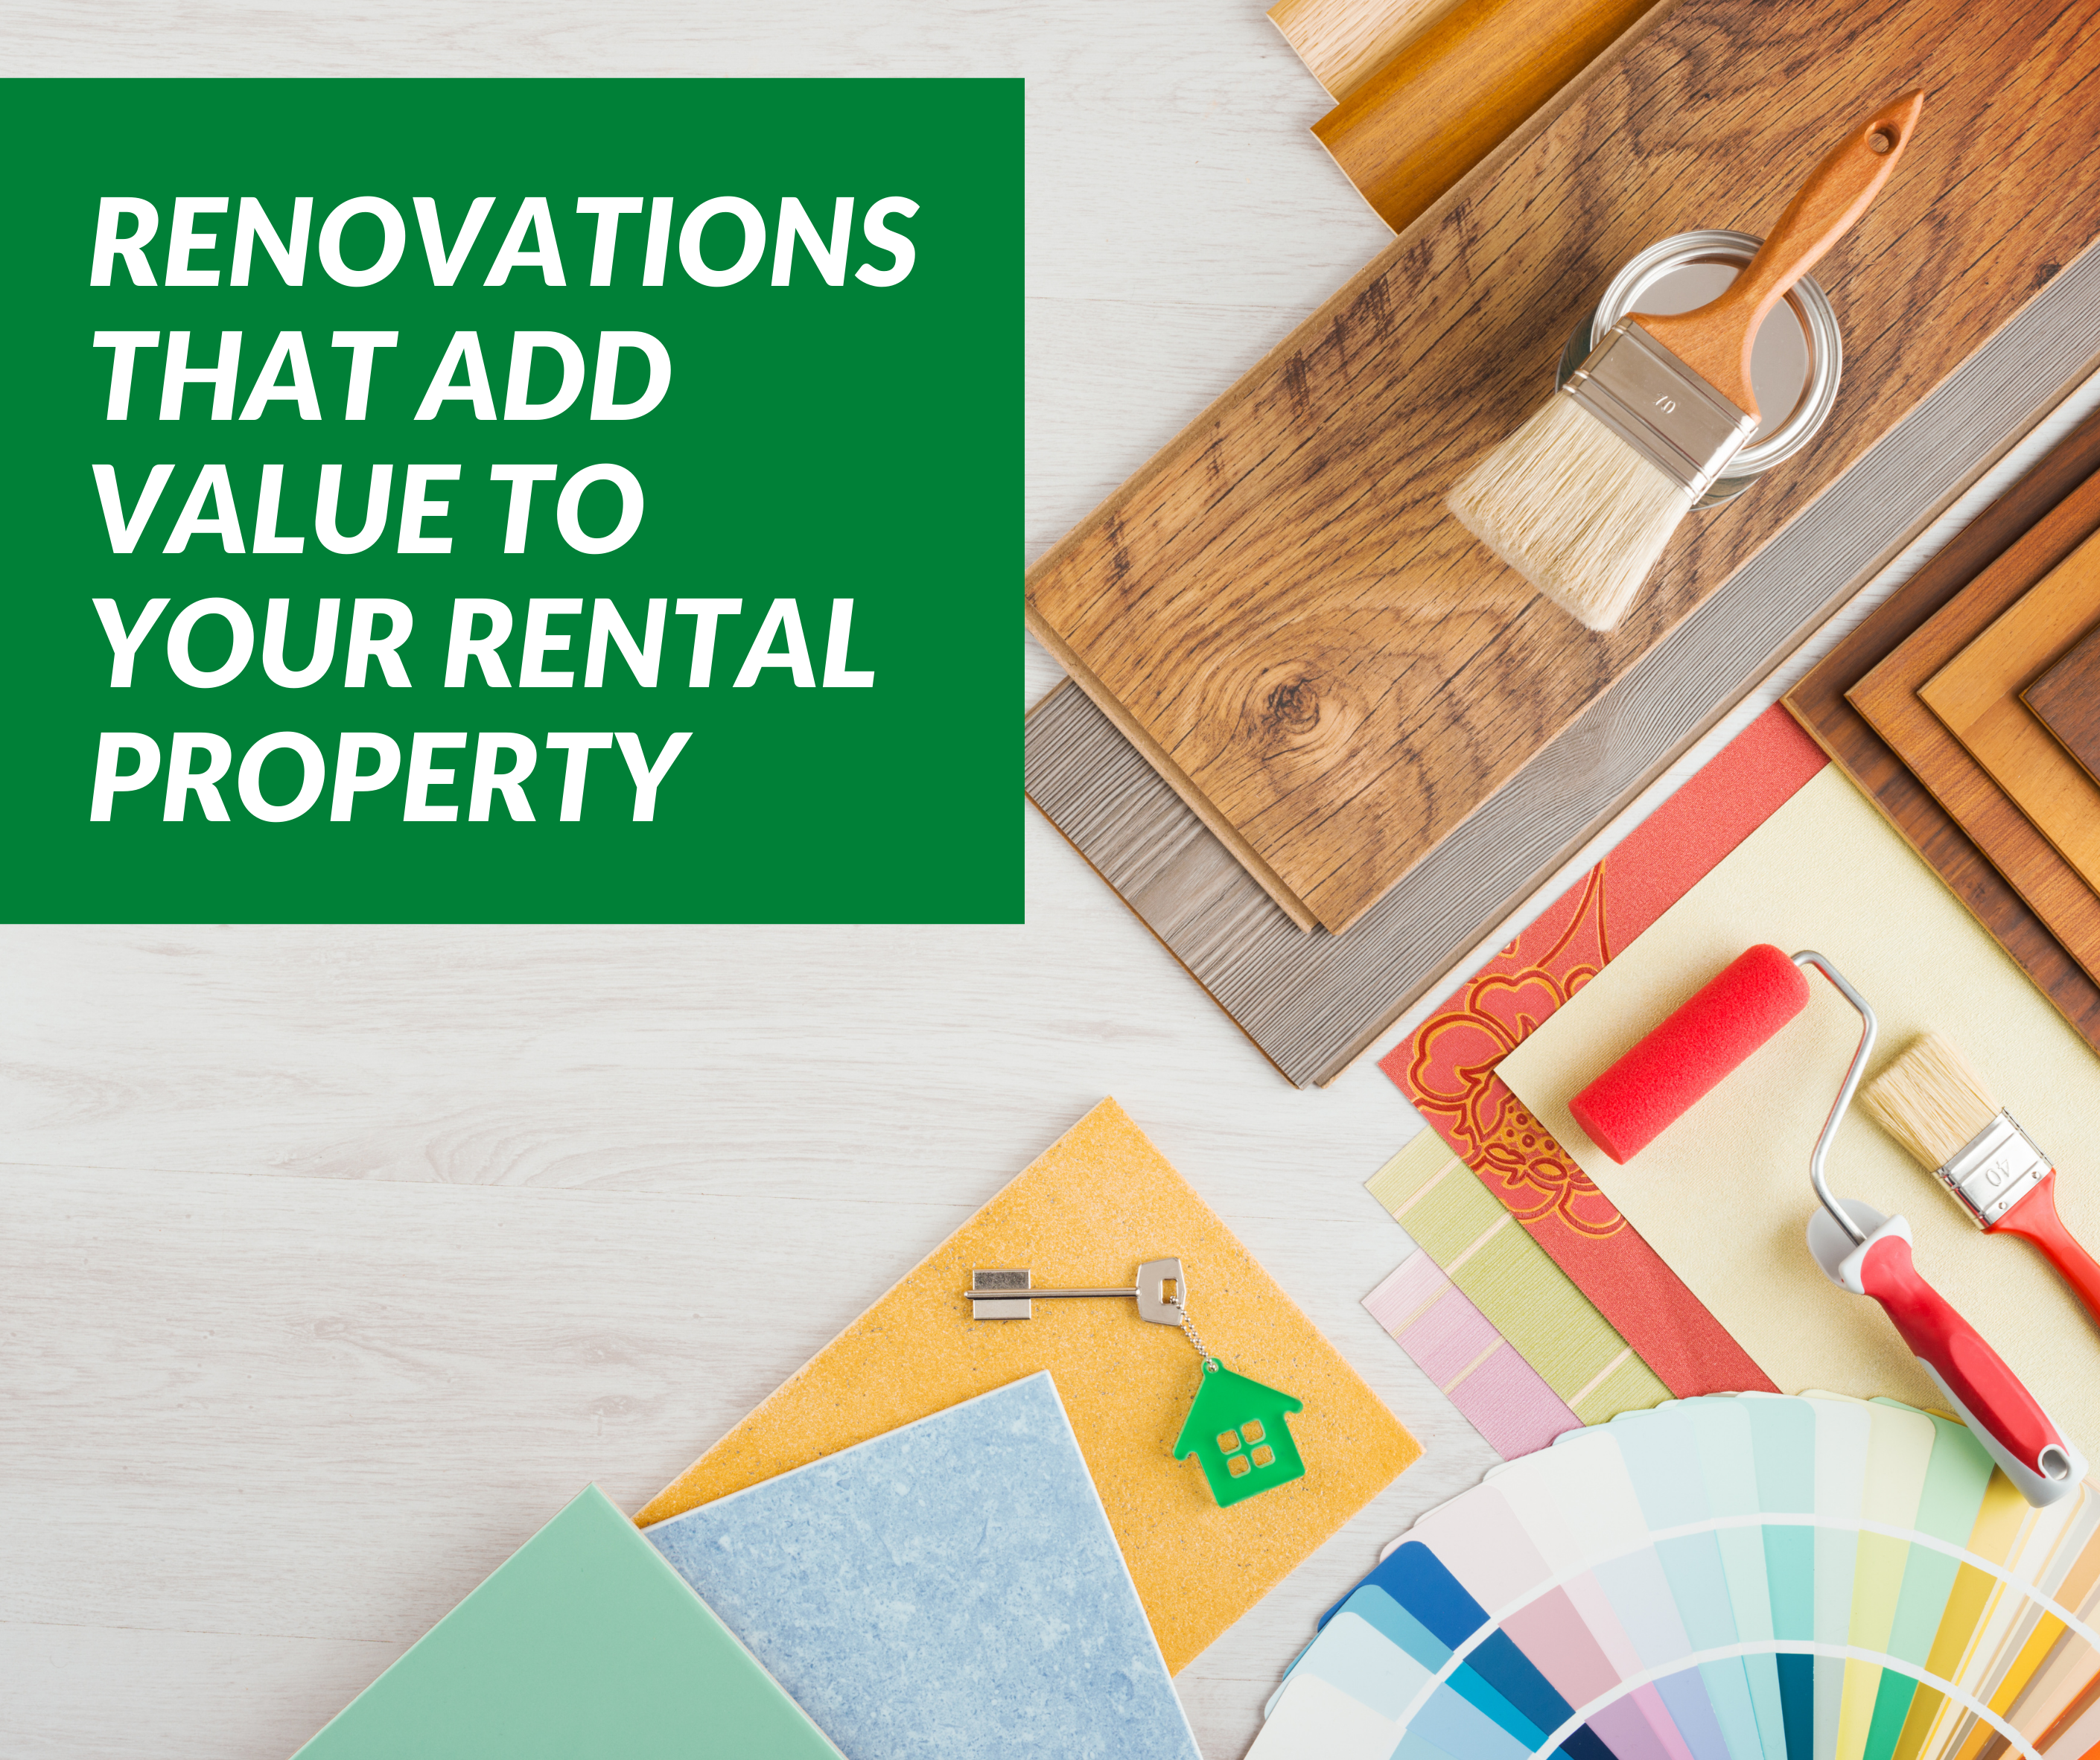 Renovations that Add Value to your Rental Property